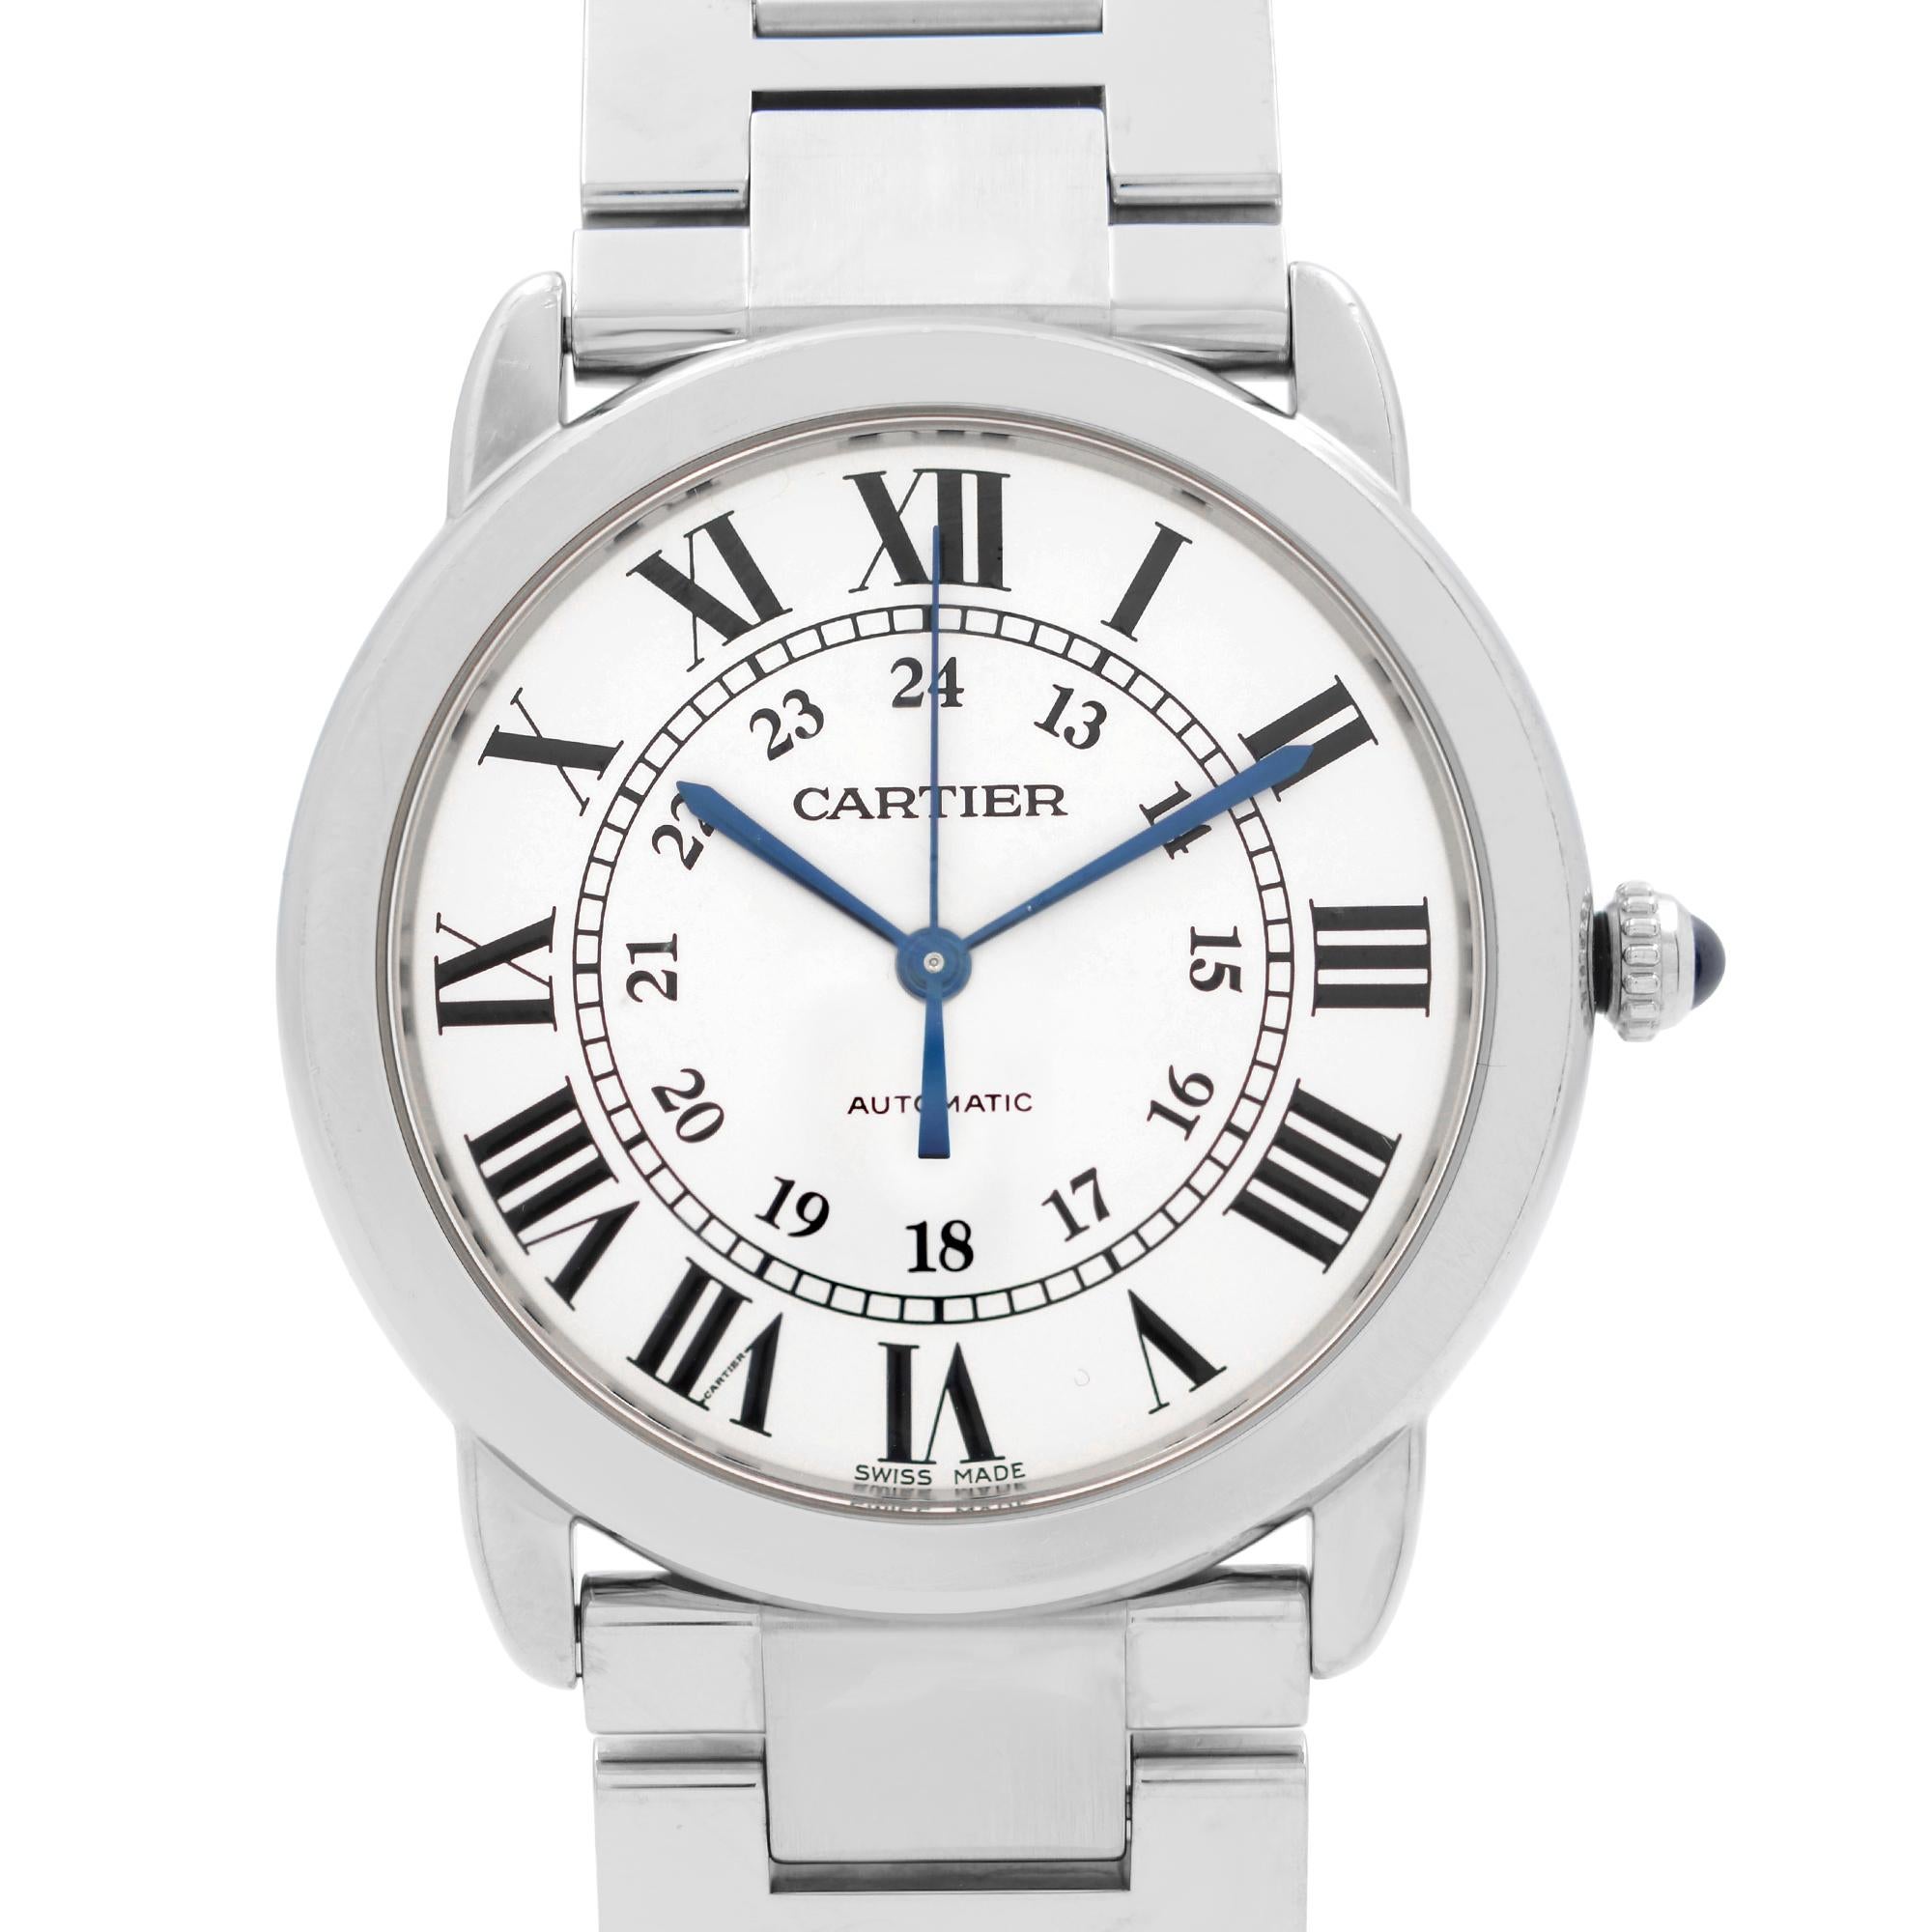 Pre-owned Cartier Ronde Solo 36MM Steel Silver Opaline Dial Unisex Watch WSRN0012. This Beautiful Timepiece Features: Stainless Steel Case with a Stainless Steel Bracelet. Fixed Stainless Steel Bezel. Silver Opaline Dial with Blued-steel